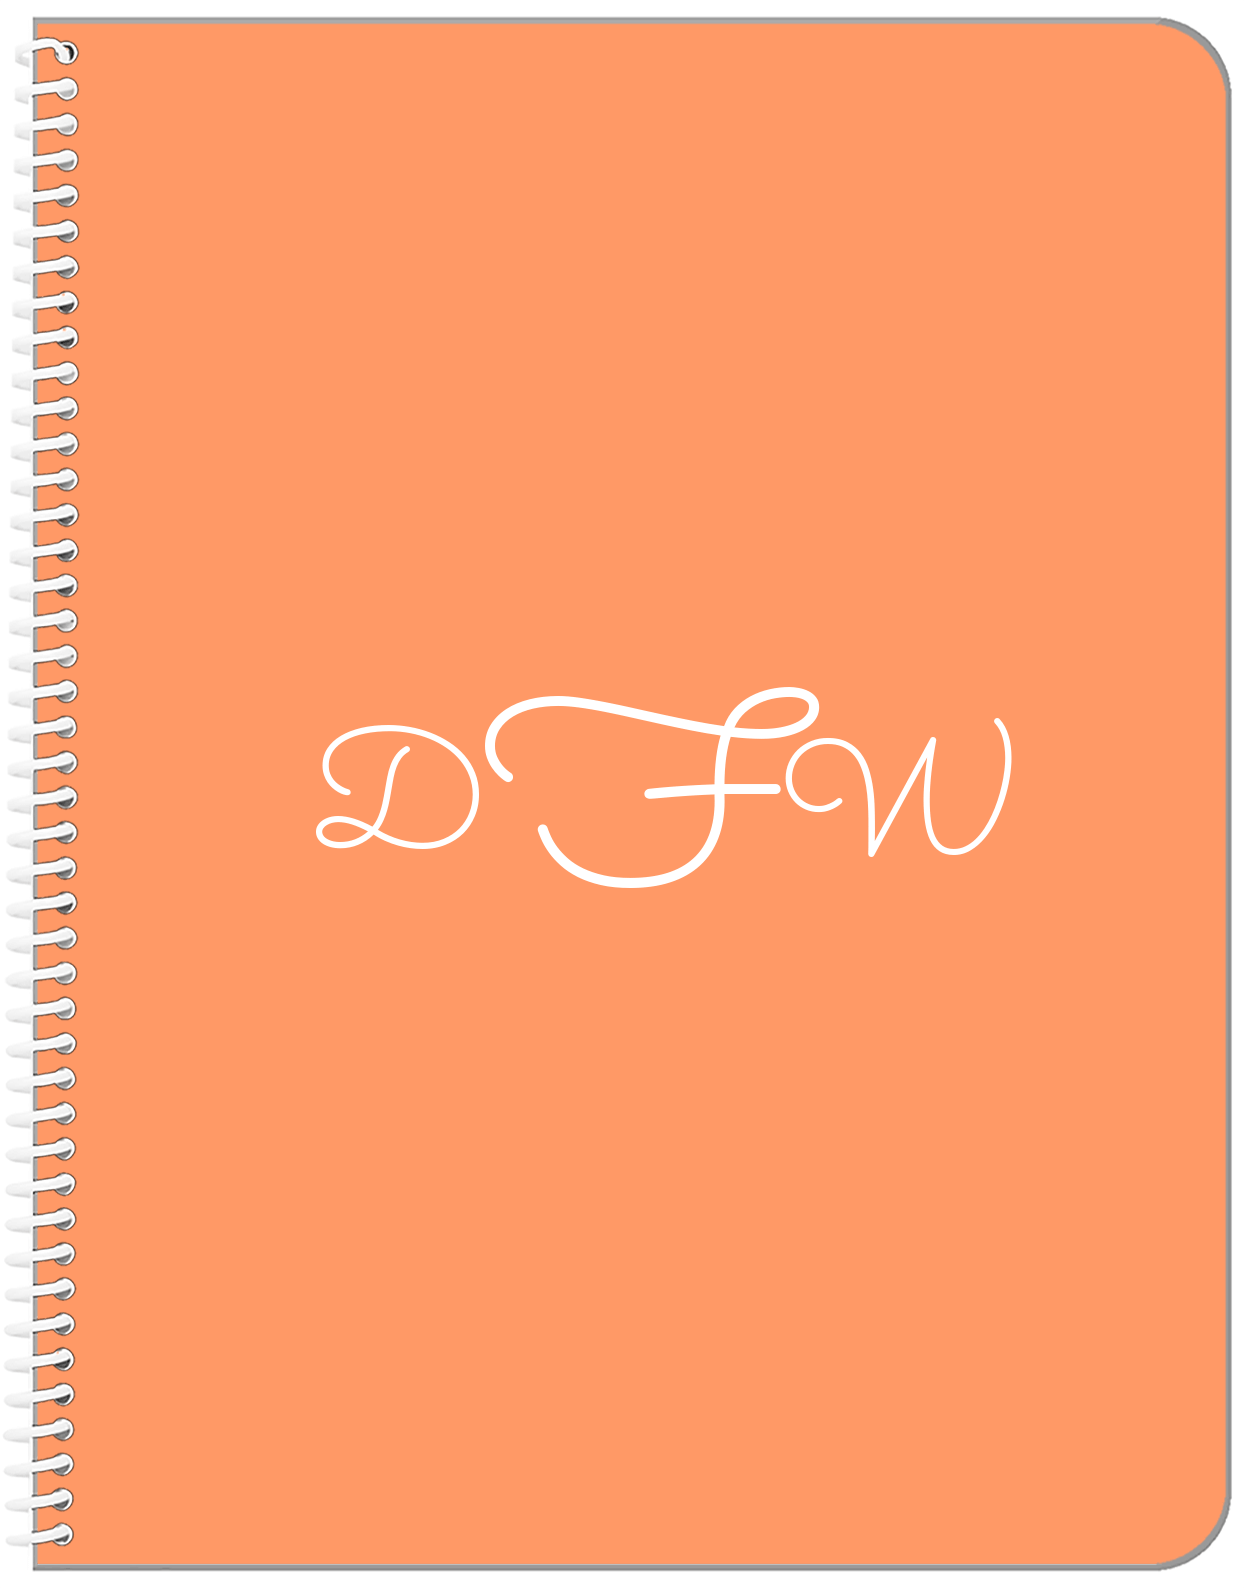 Personalized Solid Color Notebook - Orange Background - Monogram - Front View